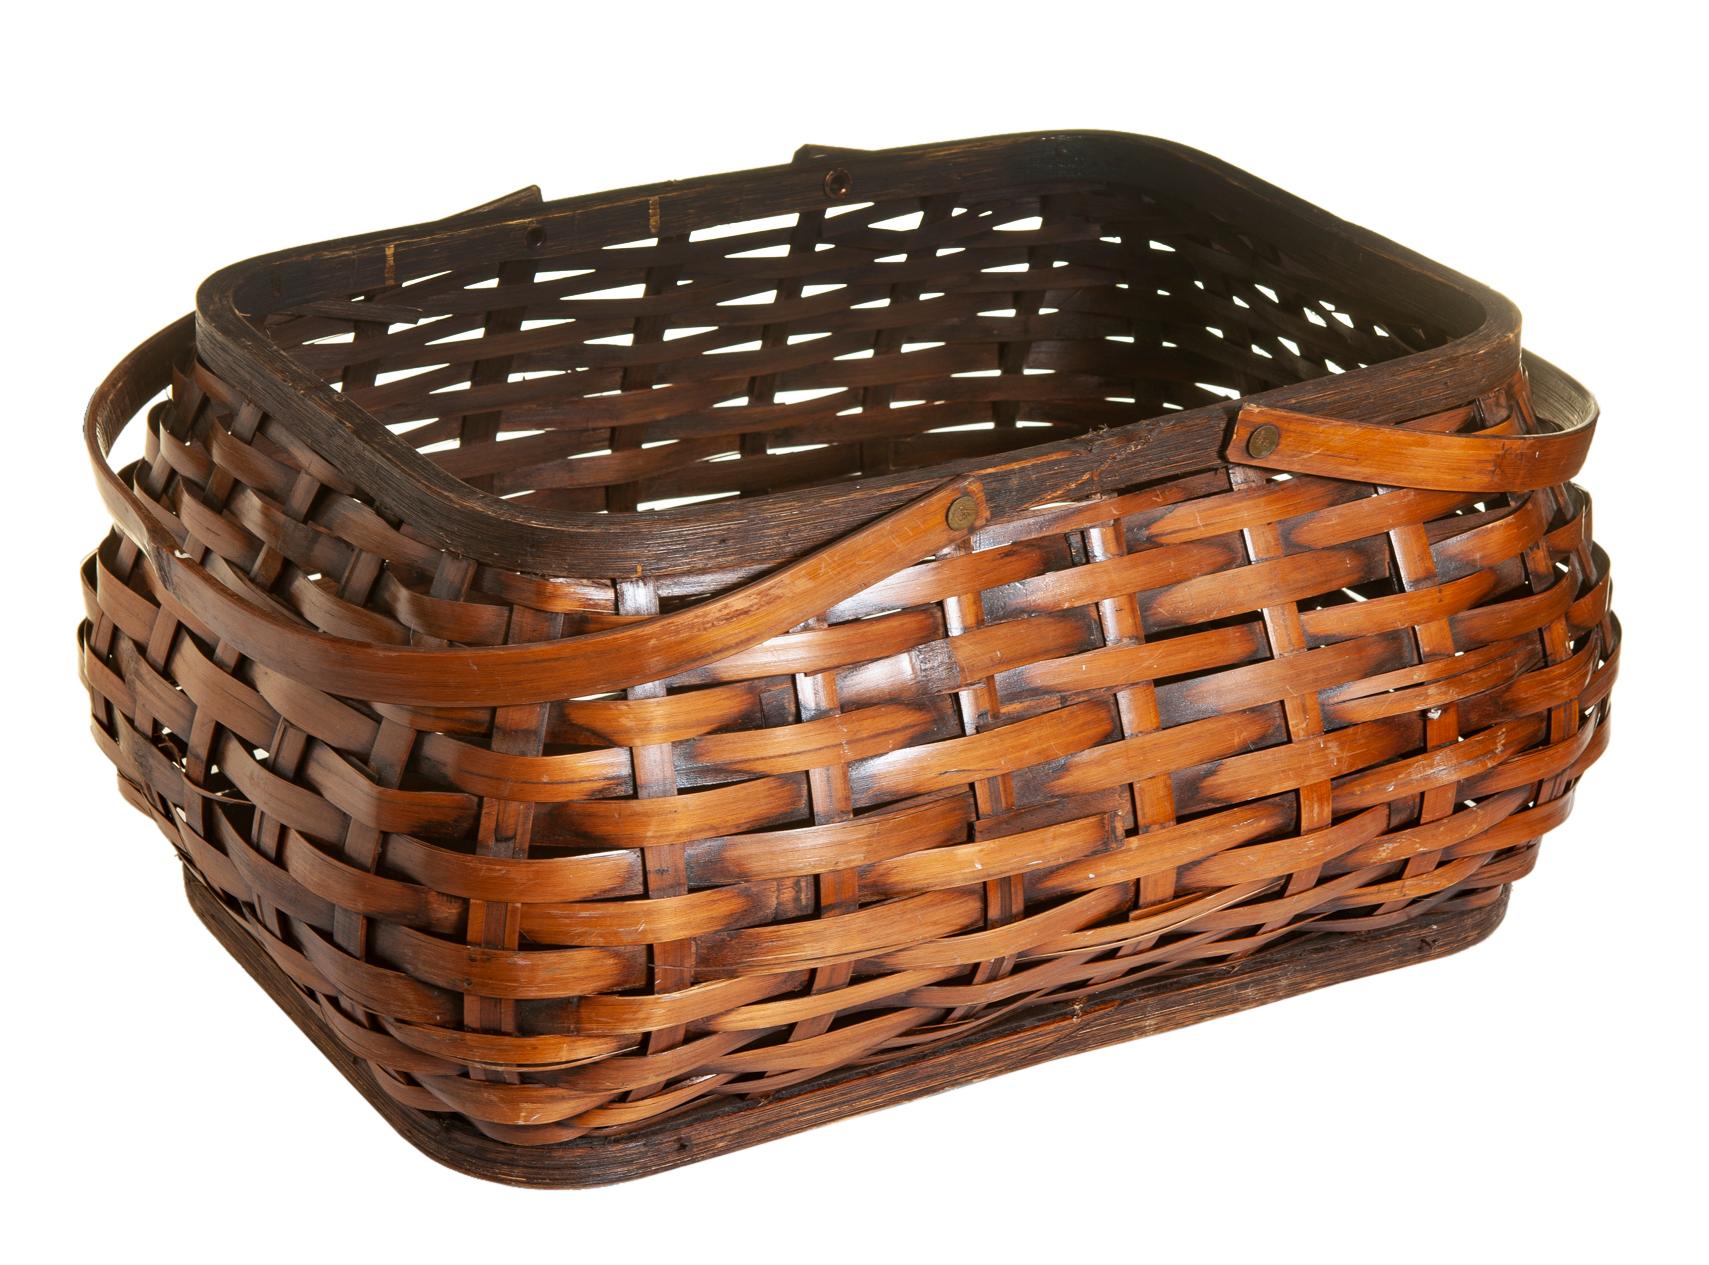 Burnished bamboo handwoven picnic basket with fitted lid with two handle attached with tiny brass hardware.